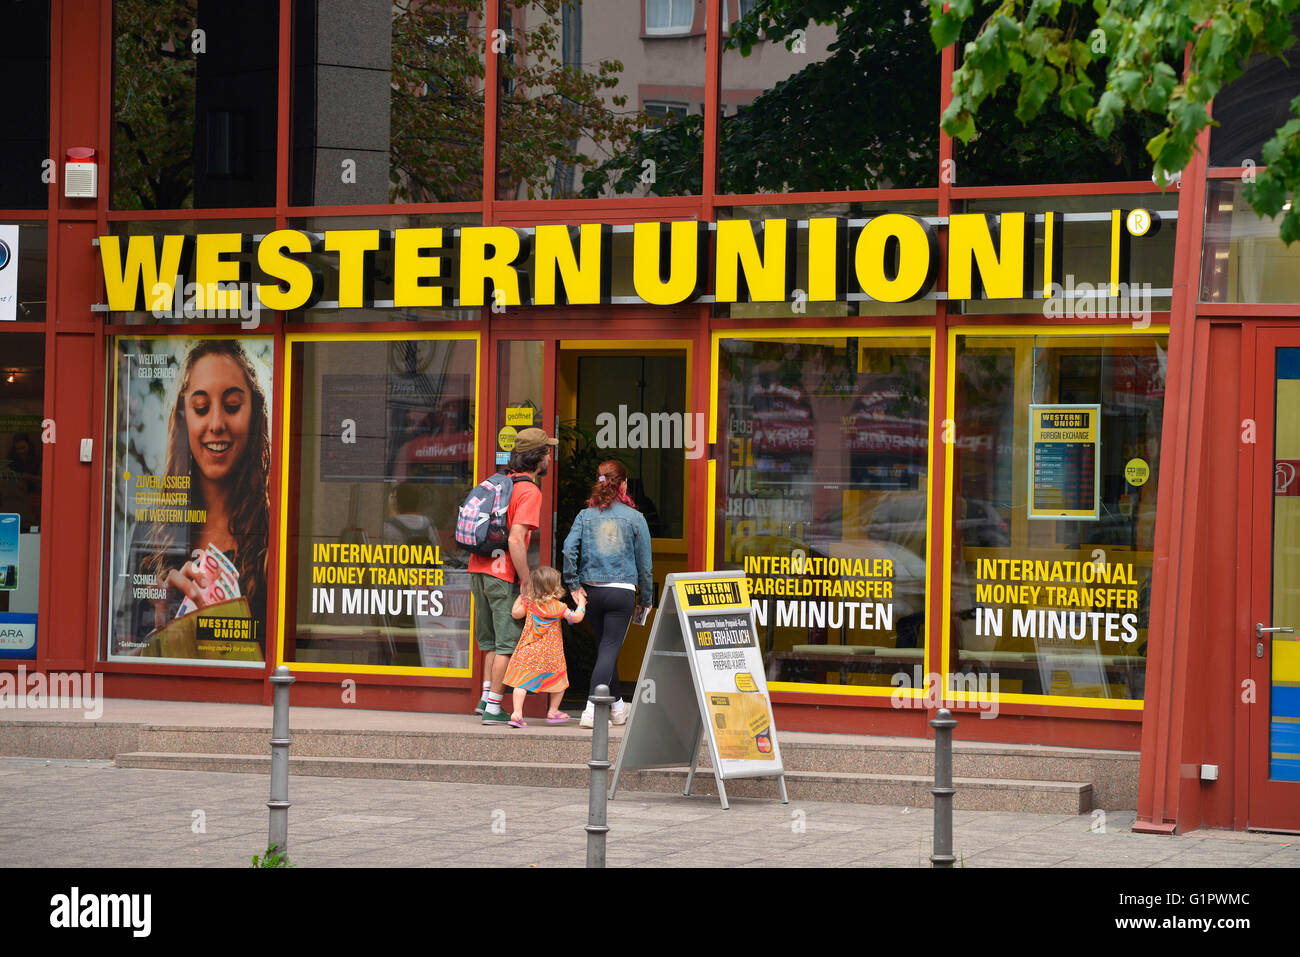 Western Union Bank High Resolution Stock Photography and Images - Alamy